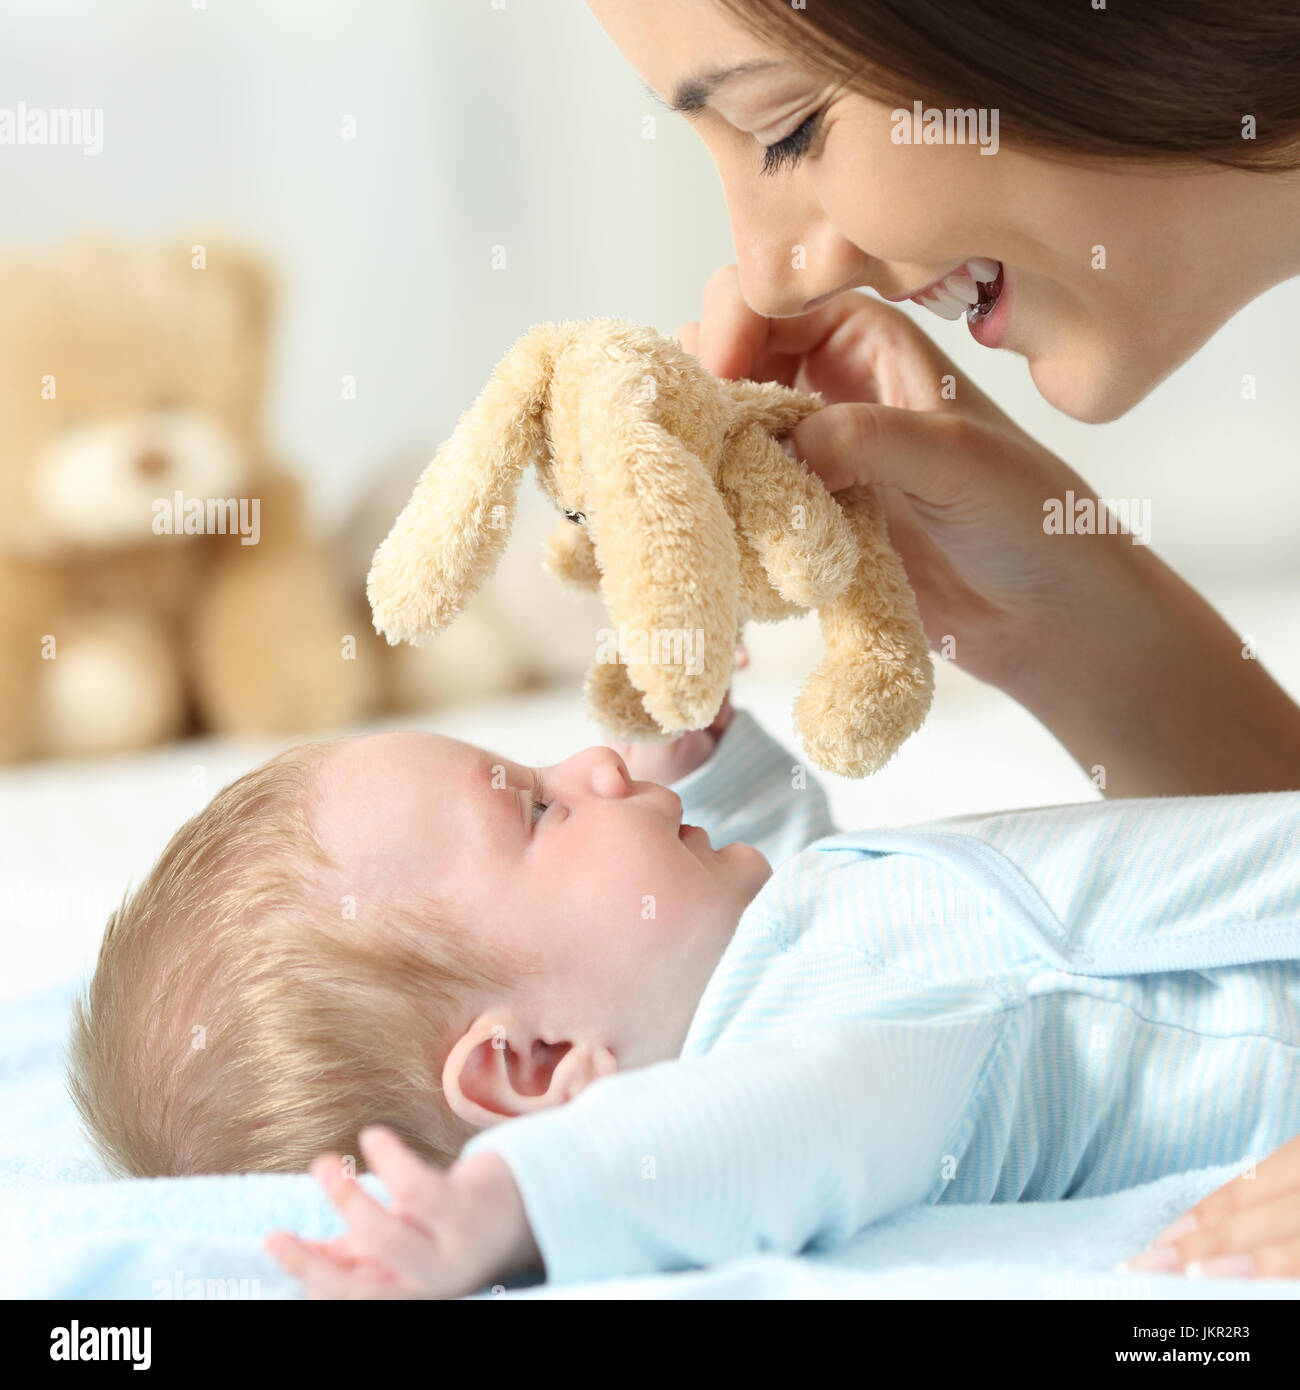 Side view close up portrait of a mother playing with her baby holding a teddy on a bed Stock Photo